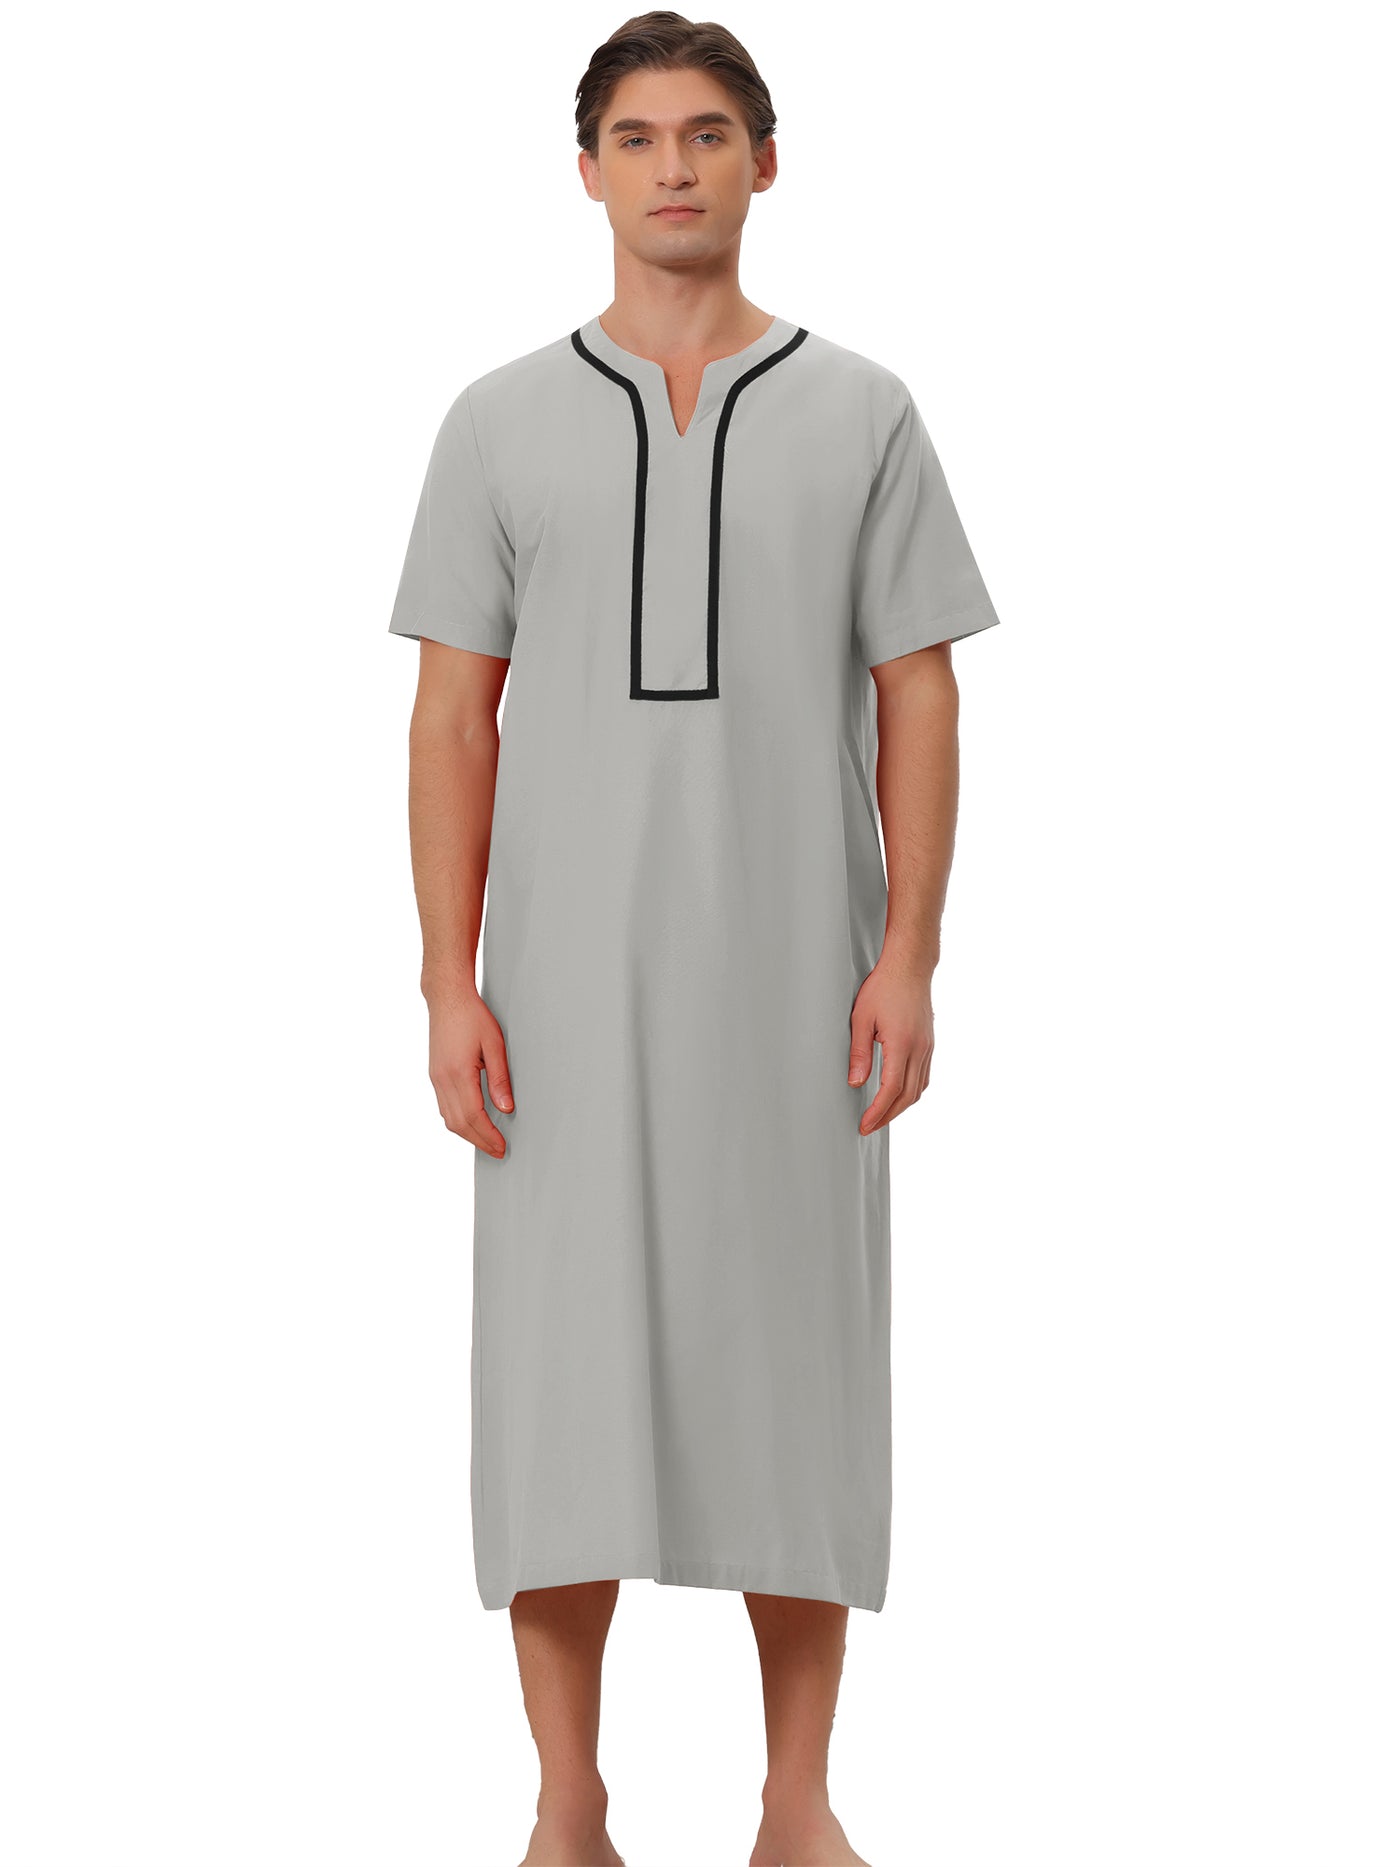 Bublédon Nightshirts for Men's Loose Fit Short Sleeves Color Block Sleepshirts Nightgown